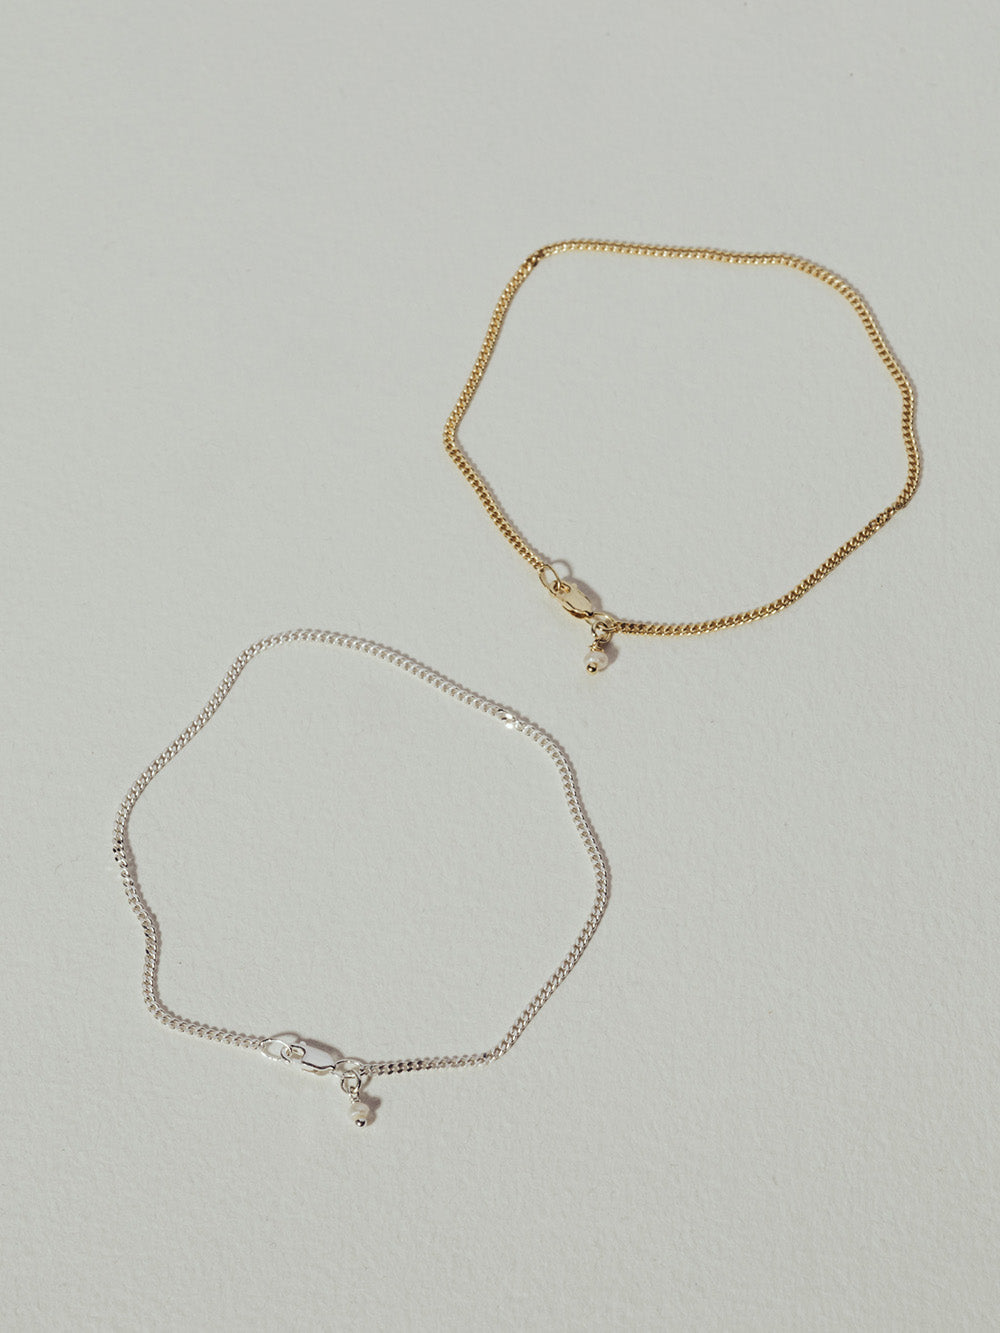 Birthstone June - Pearl | 14K Gold Plated